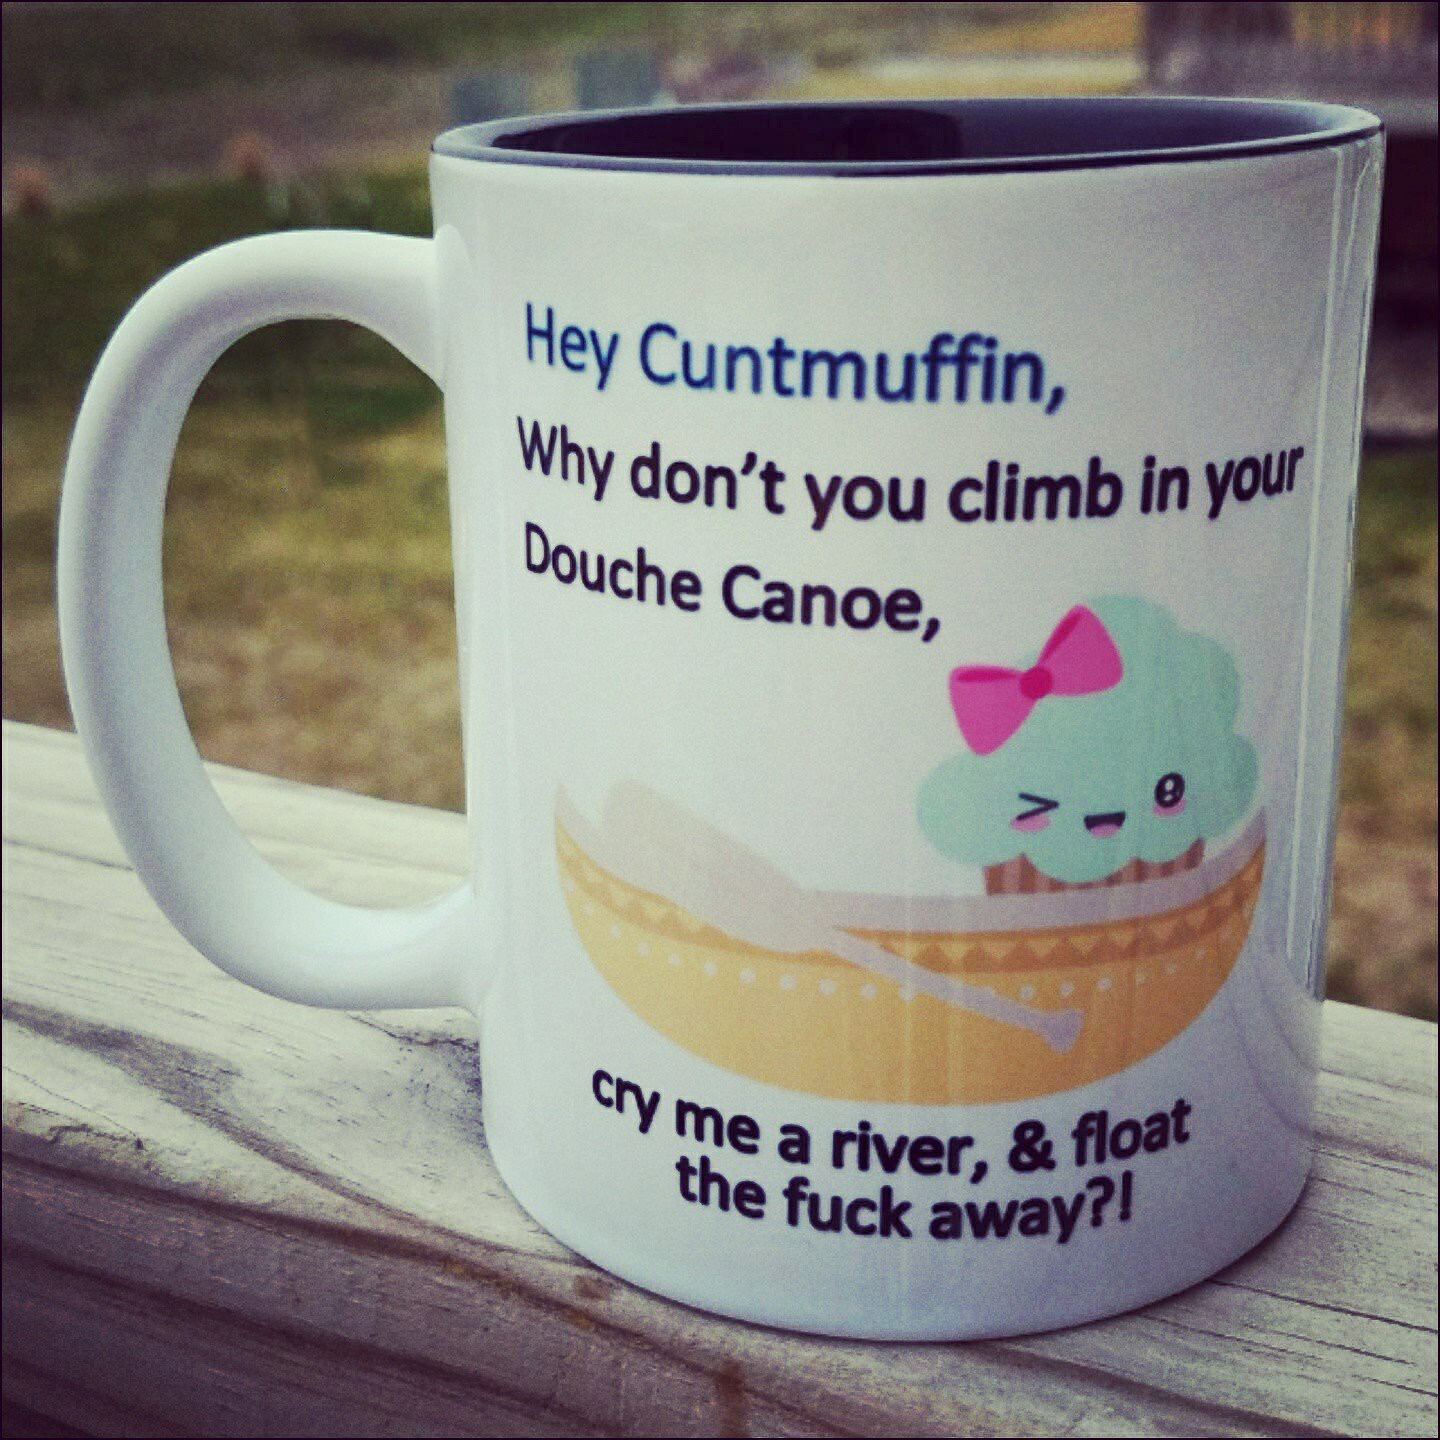 cry me a river cunt mug - Hey Cuntmuffin, Why don't you climb in your Douche Canoe, cry me a riy e a river, & float the fuck away?!